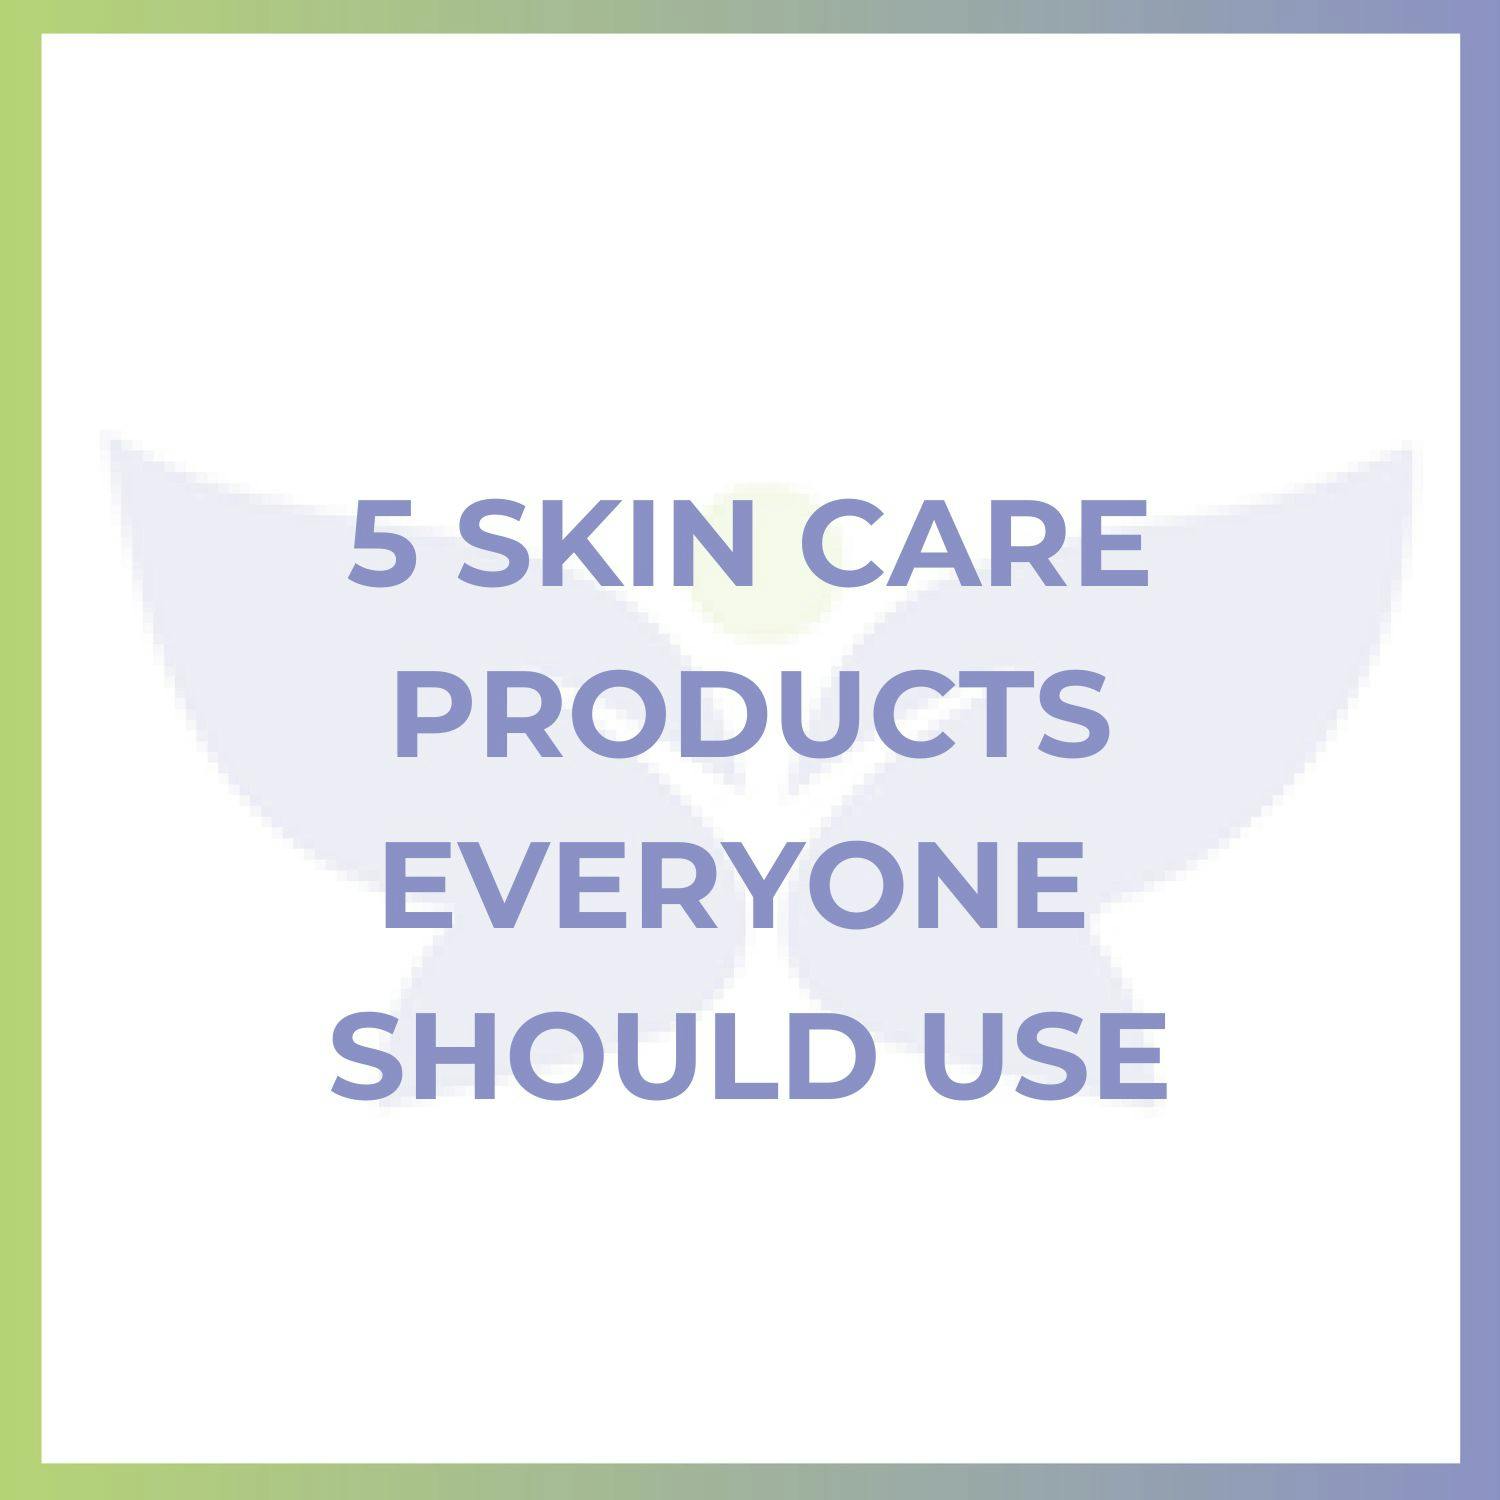 5 Skin Care Products Everyone Should Use